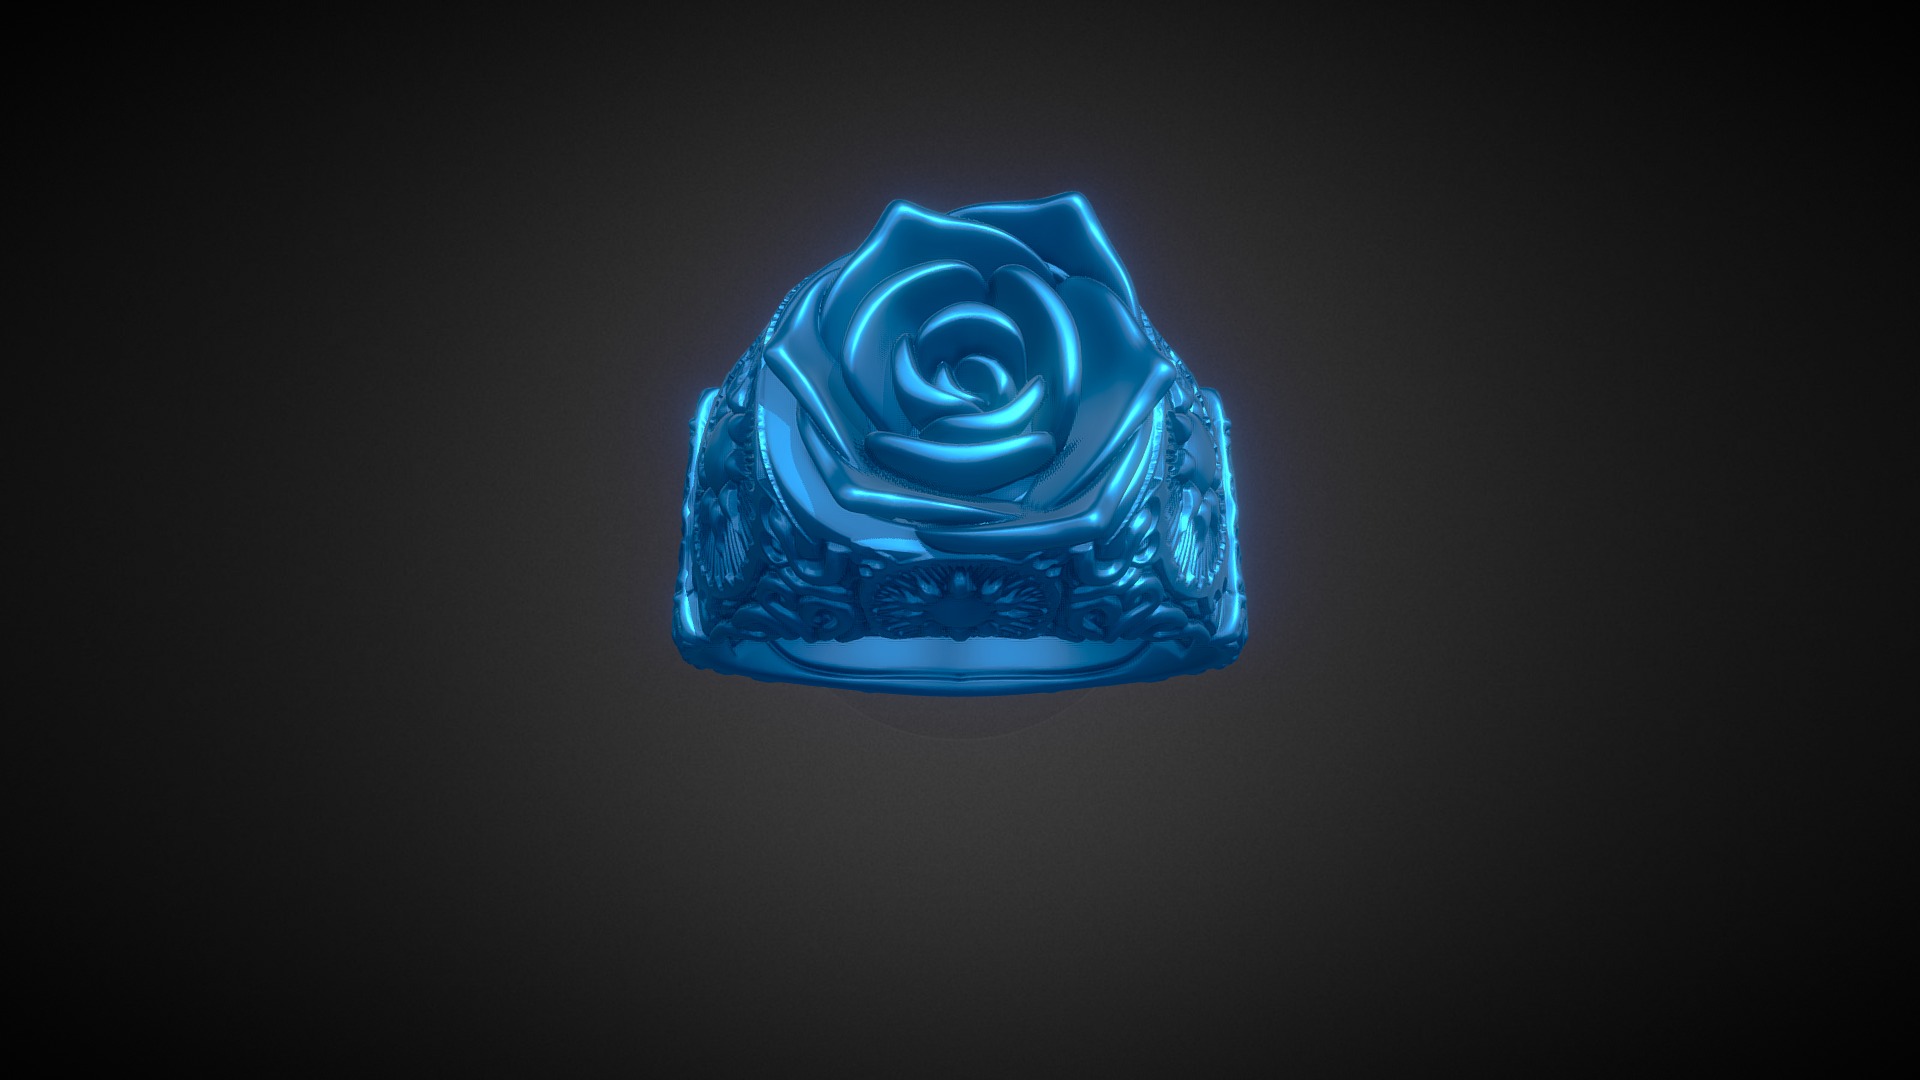 3D model Rose Signet Ring US Size 9 - This is a 3D model of the Rose Signet Ring US Size 9. The 3D model is about a blue rose on a black background.